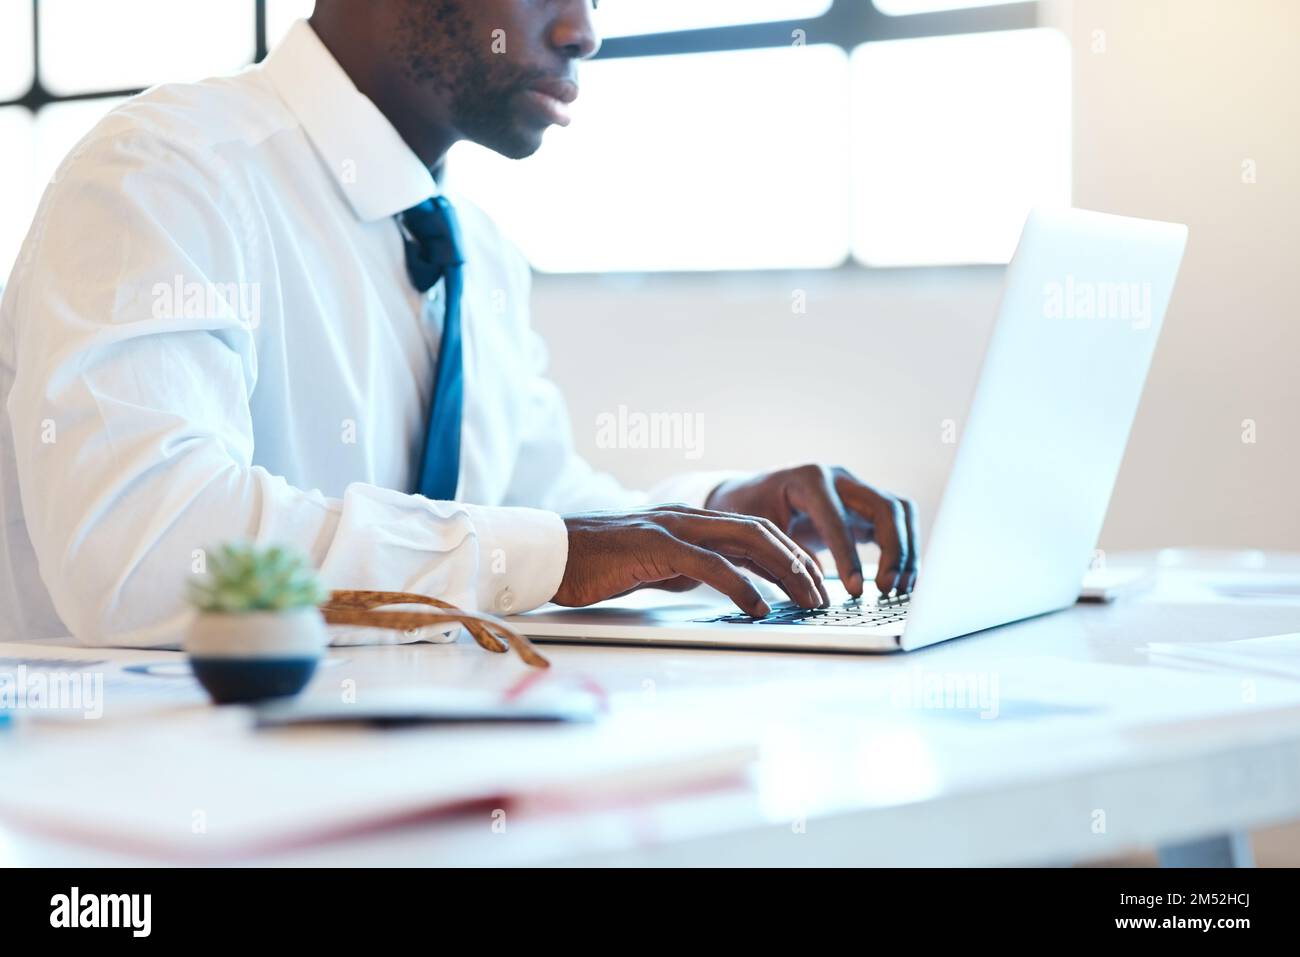 Back to work. an unrecognizable businessman typing on his laptop while being seated at a desk in the office during the day. Stock Photo